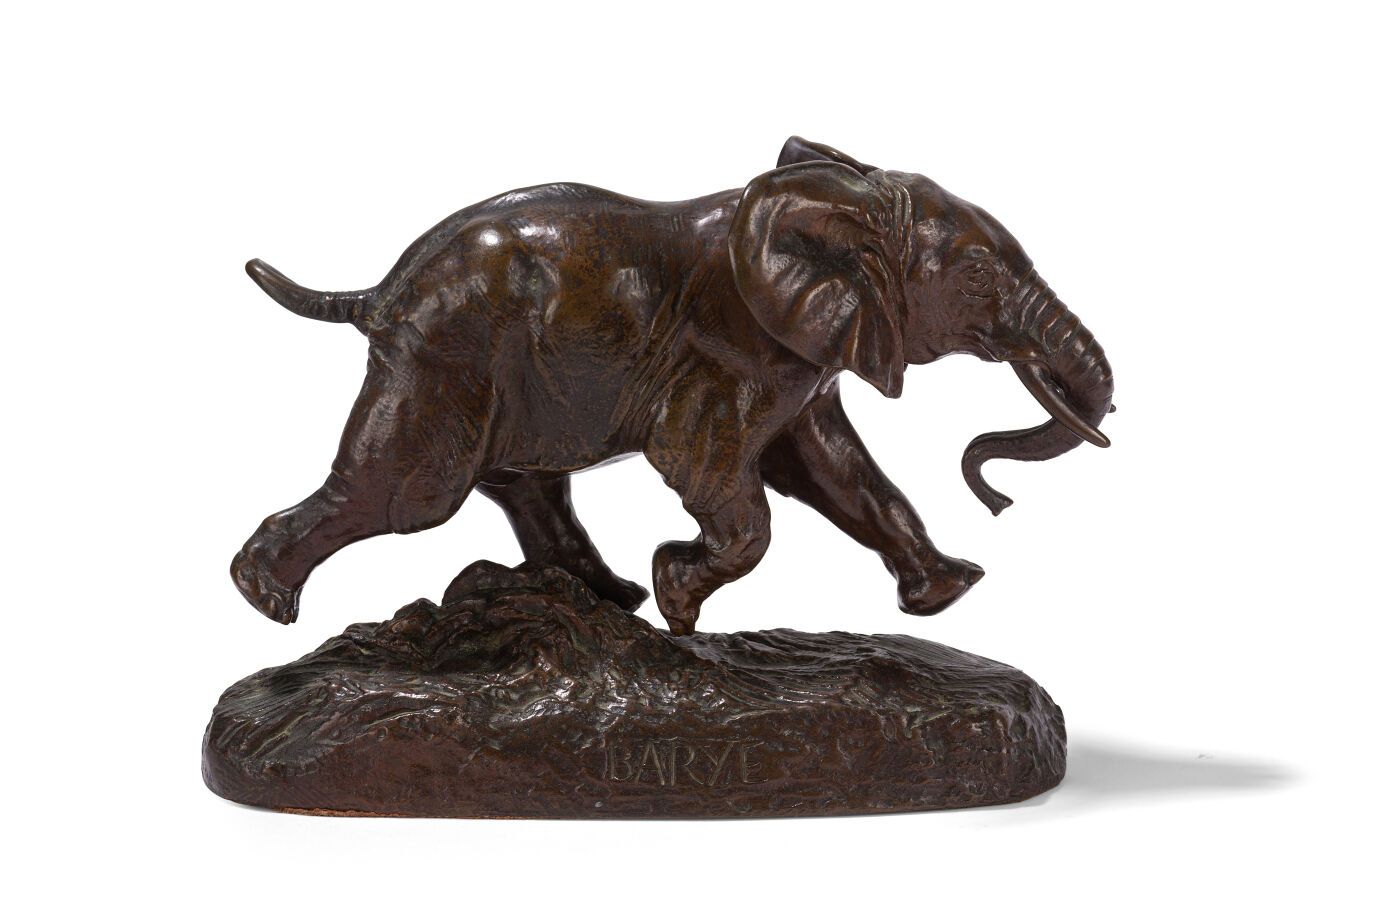 Null FIGURE OF ELEPHANT IN BRONZE WITH BROWN PATE

signed Barye, with the stamp &hellip;